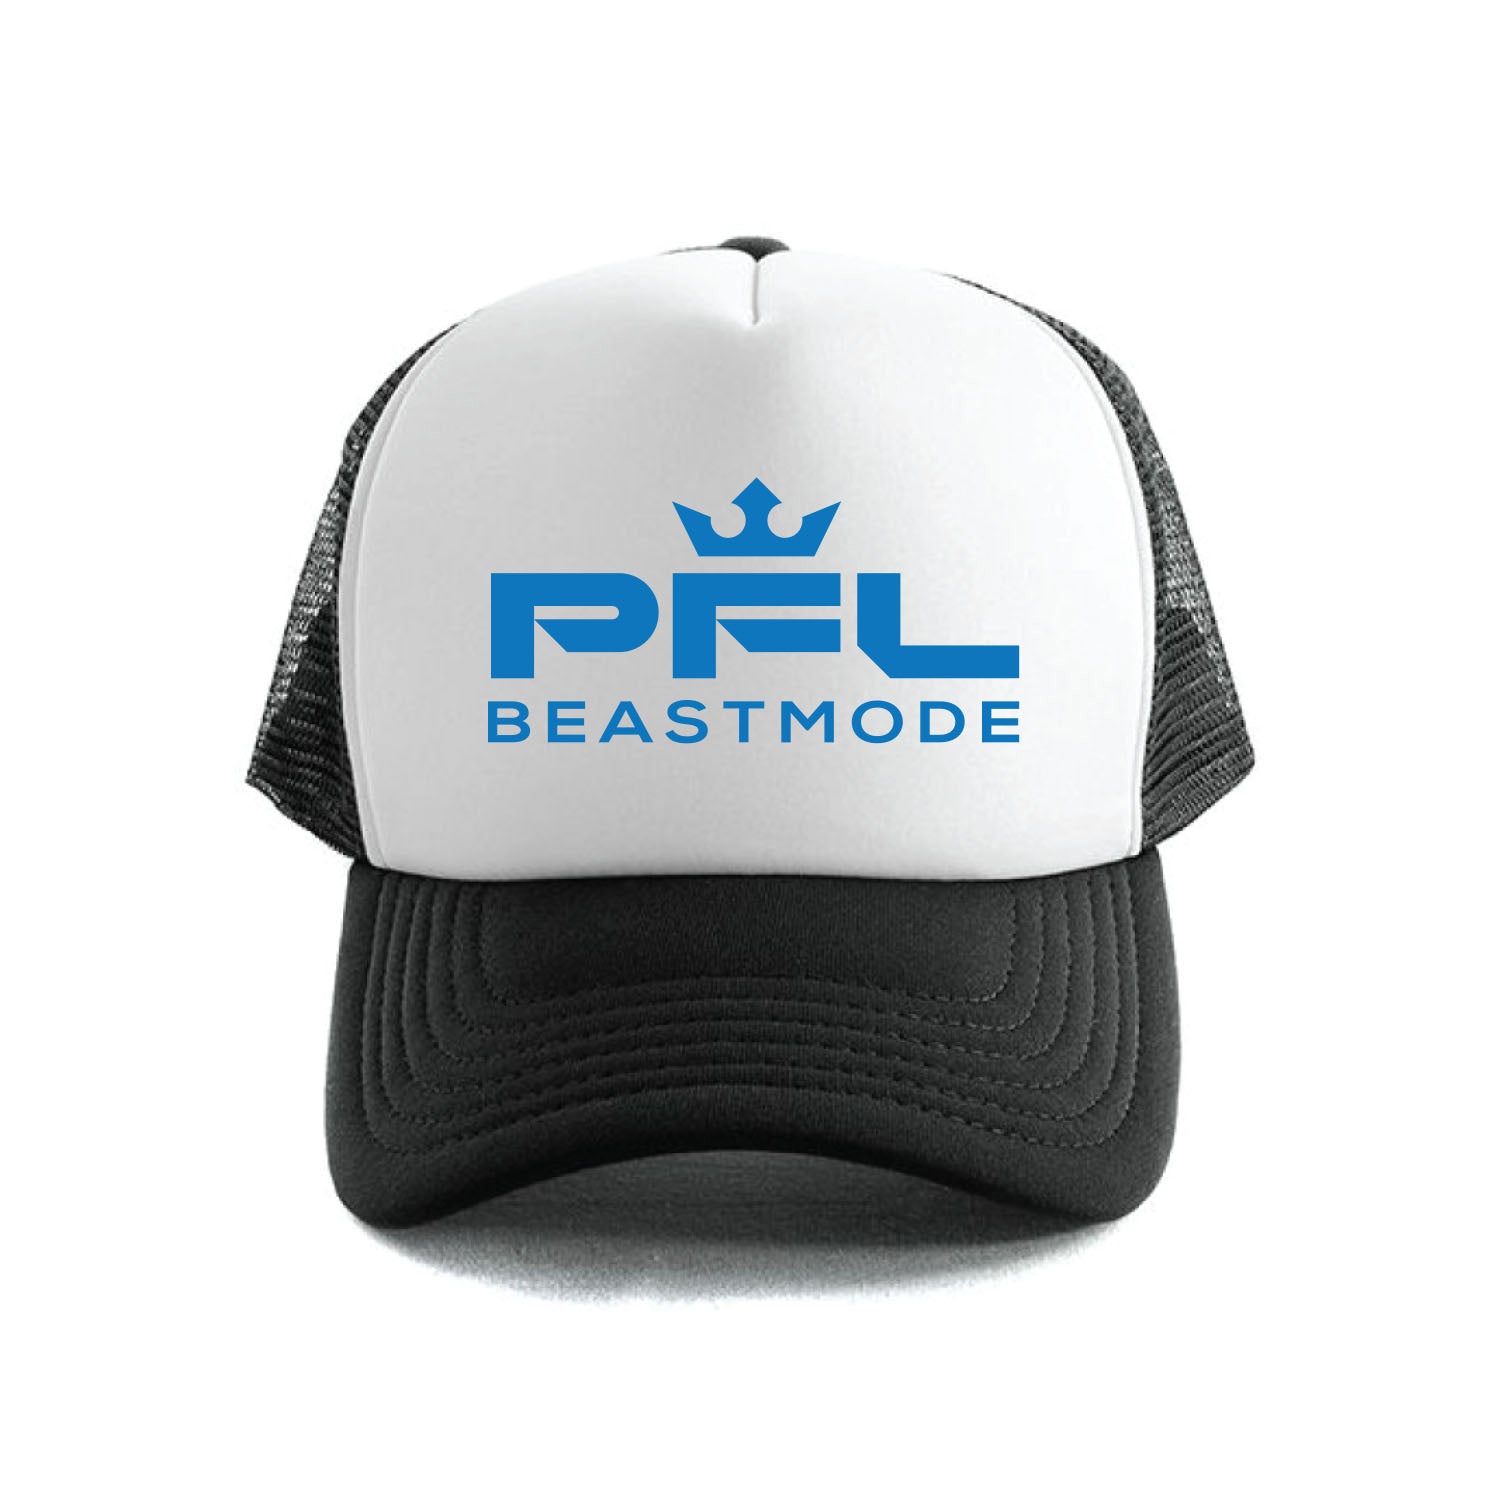 PFL x Beastmode Trucker Hat in Black and White - Front View